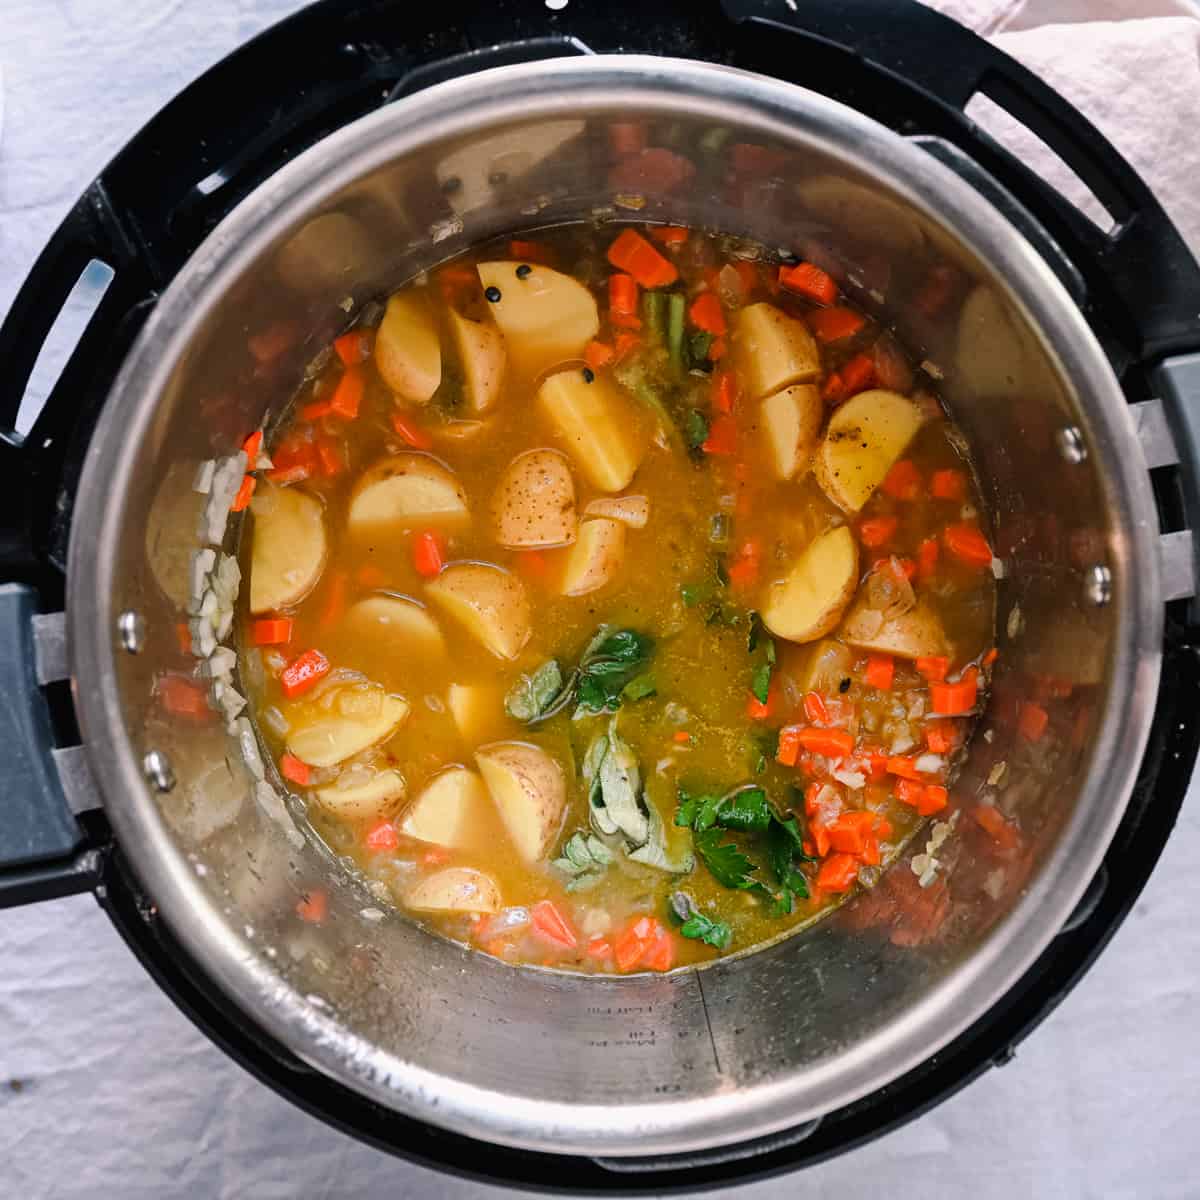 bouqet garni, potatoes, and lentils in vegetable broth in instant pot for soup